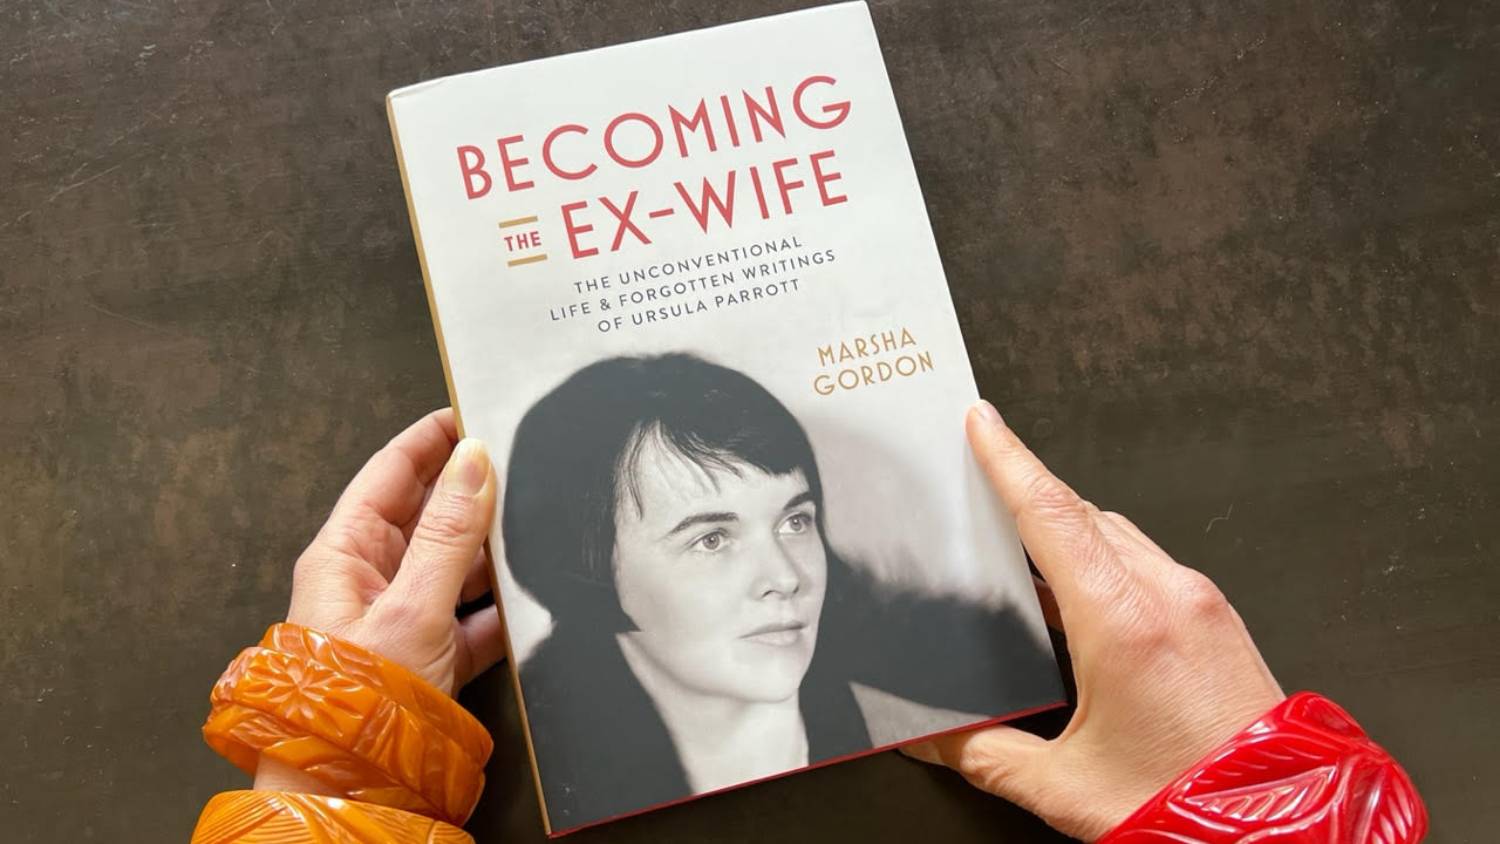 Two hands hold a copy of Marsha Gordon's book, "Becoming the Ex-Wife"